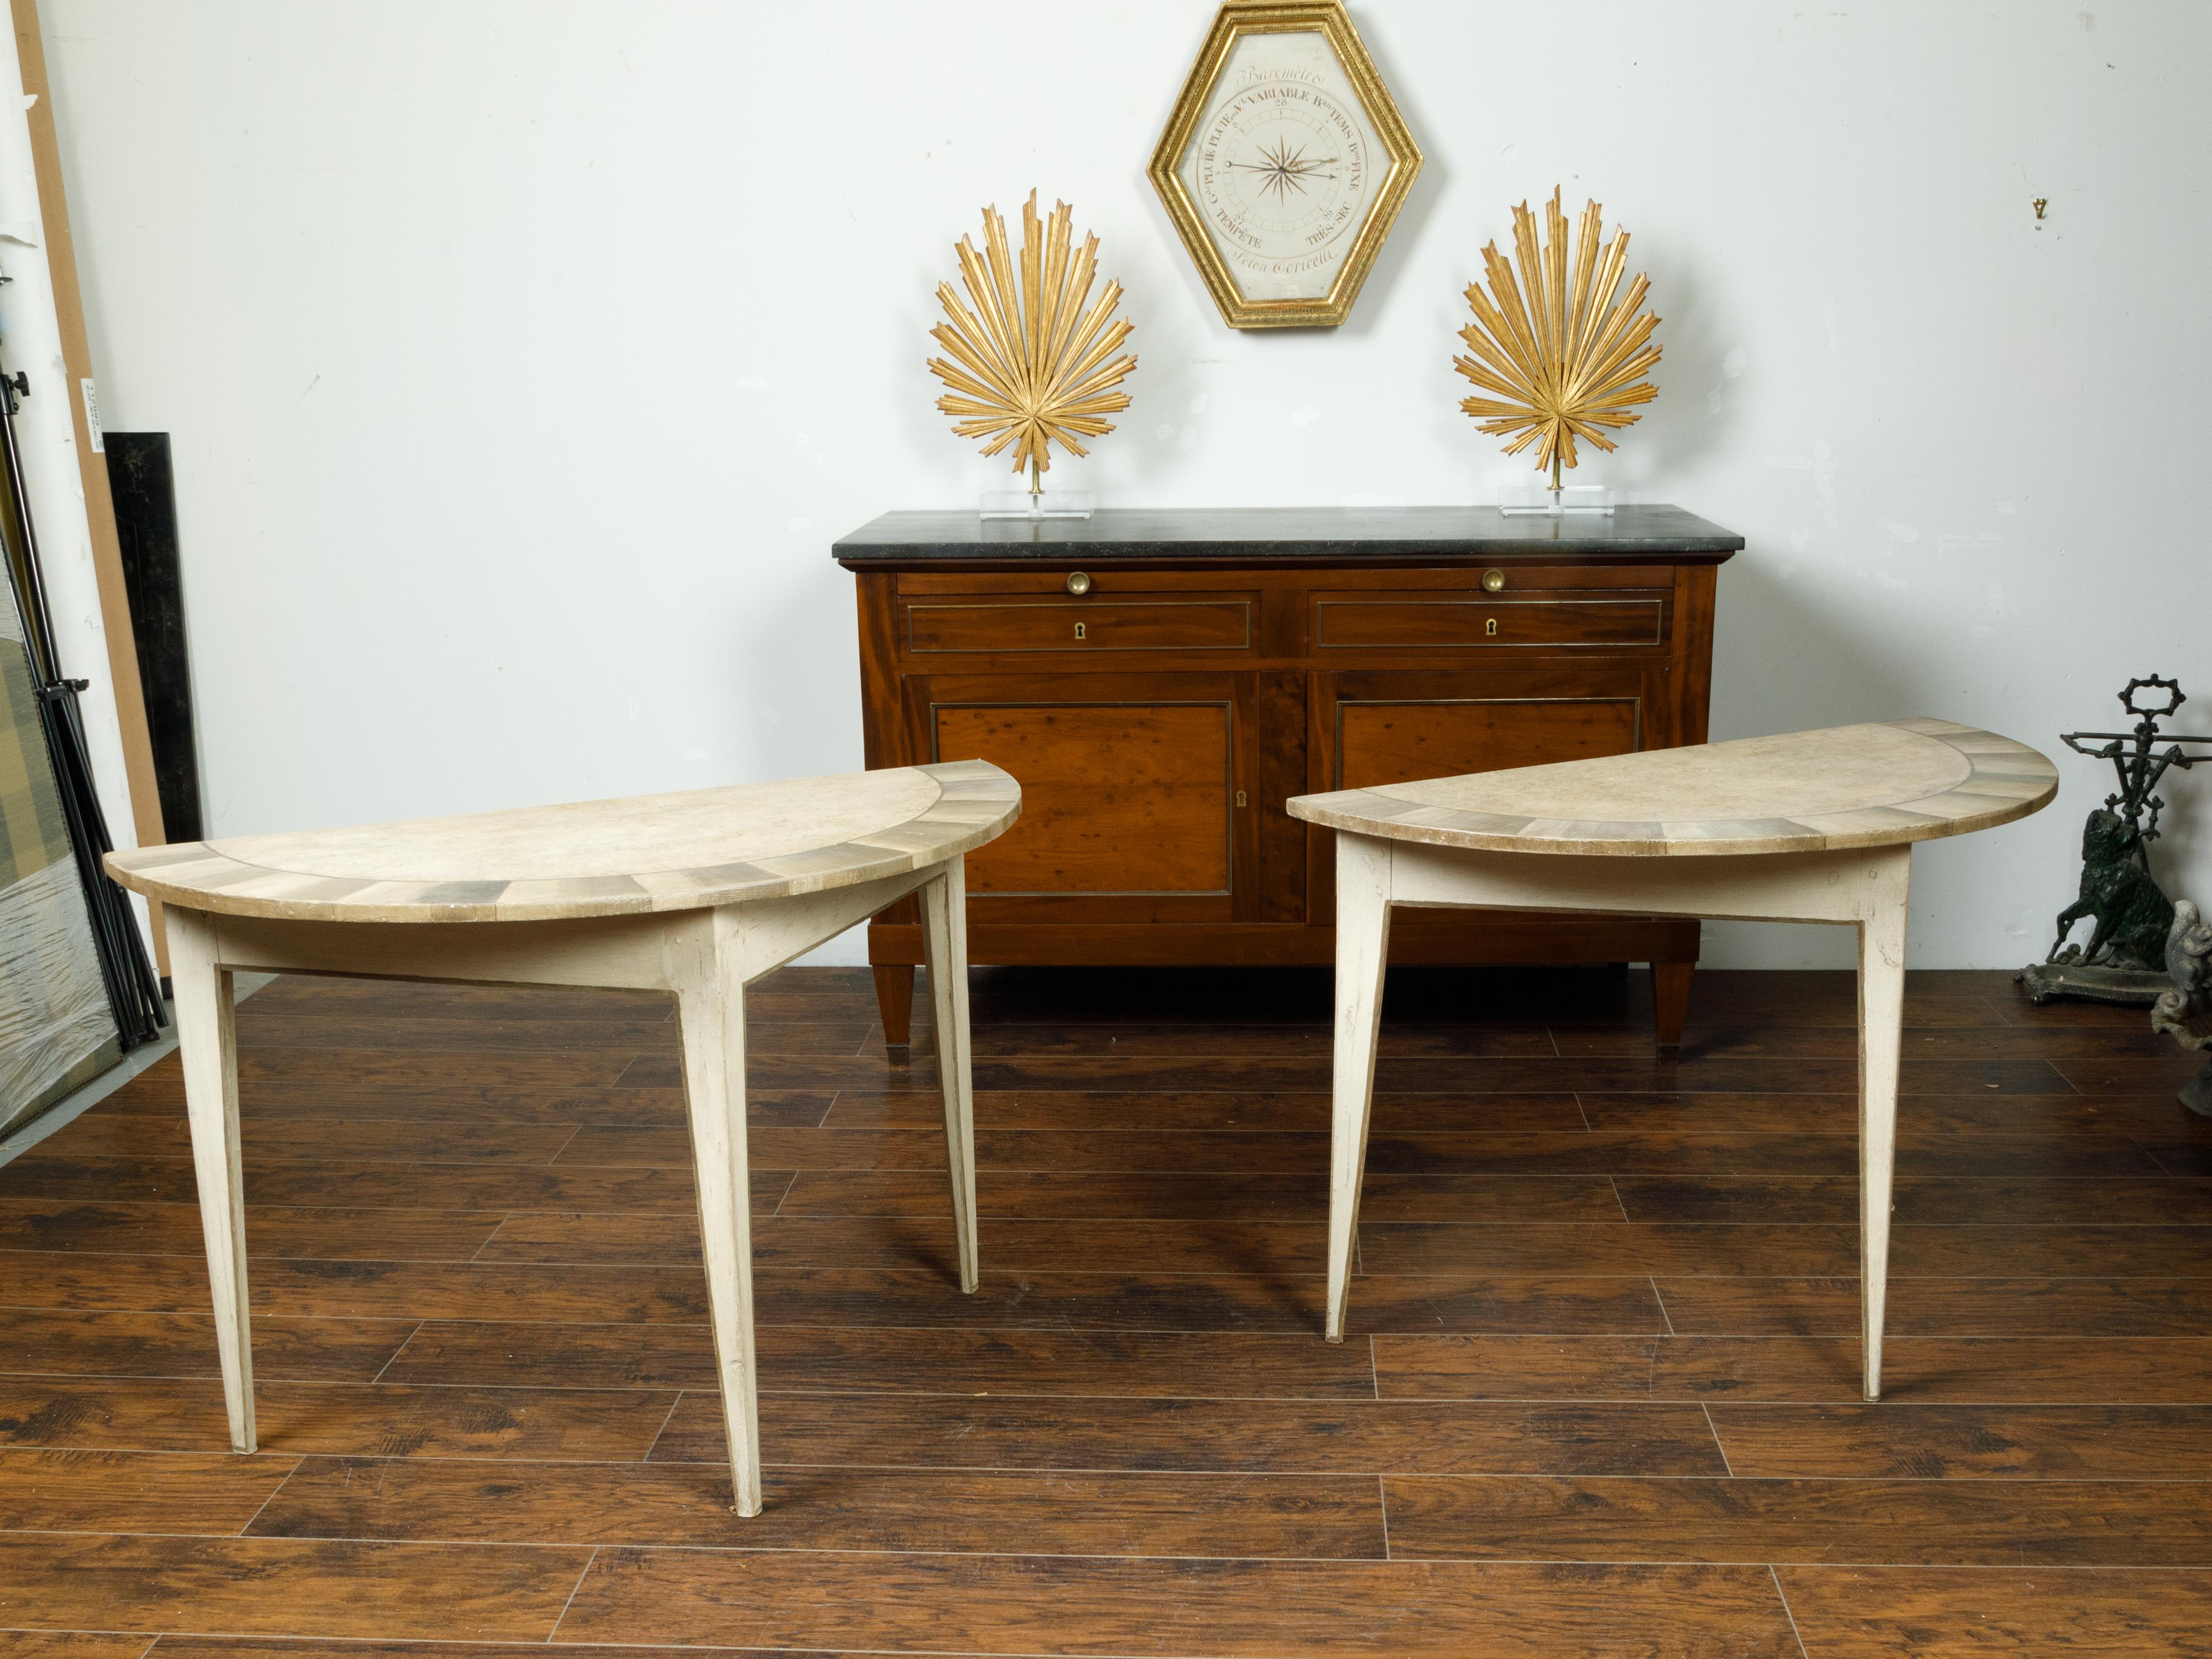 20th Century Pair of Swedish 1930-1940 Painted Wood Demilune Tables with Radiating Motifs